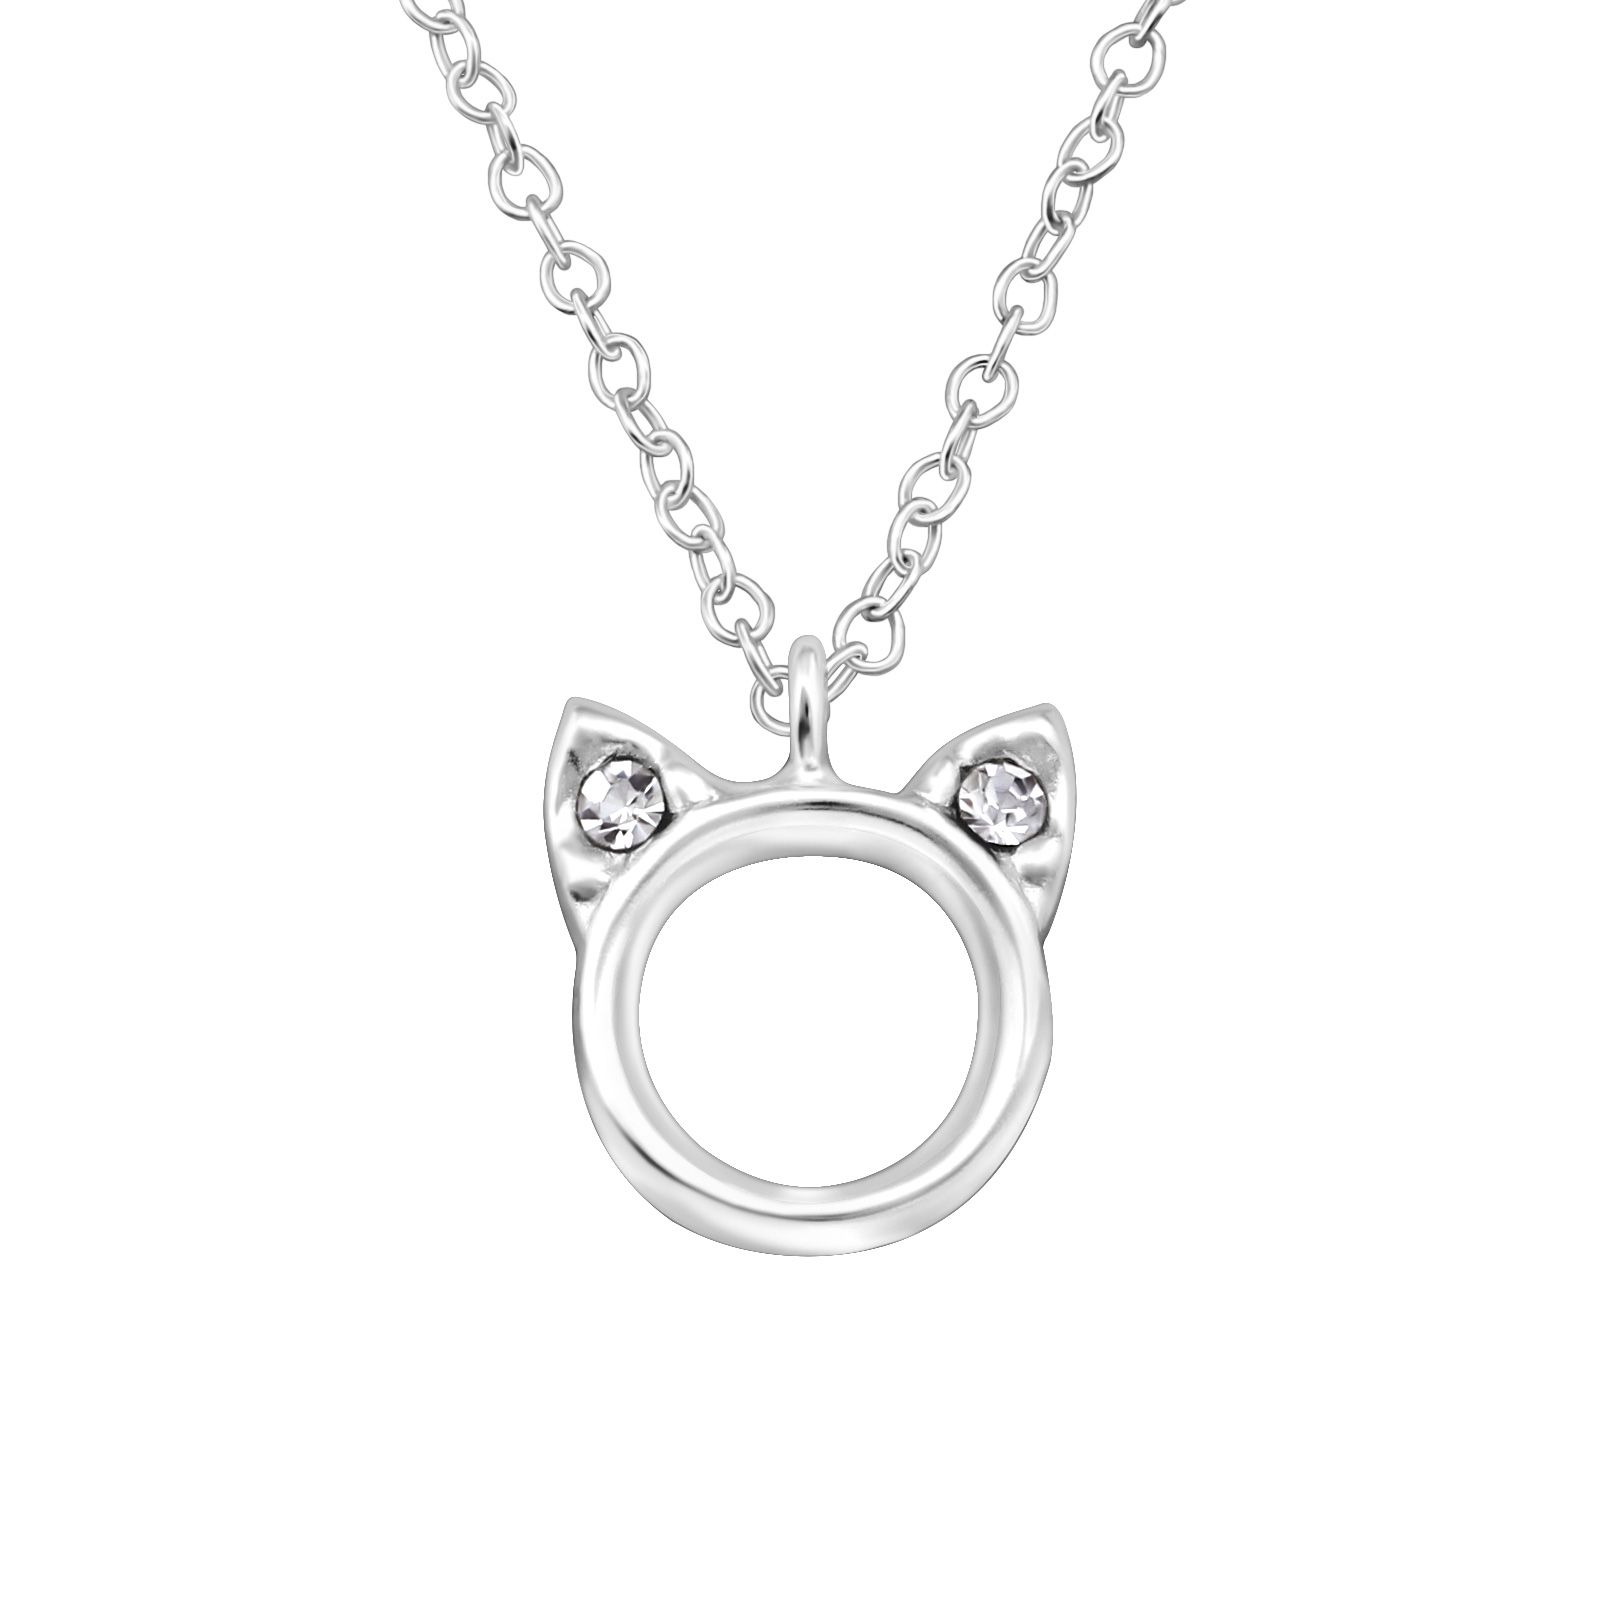 Girls Silver Cat Necklace